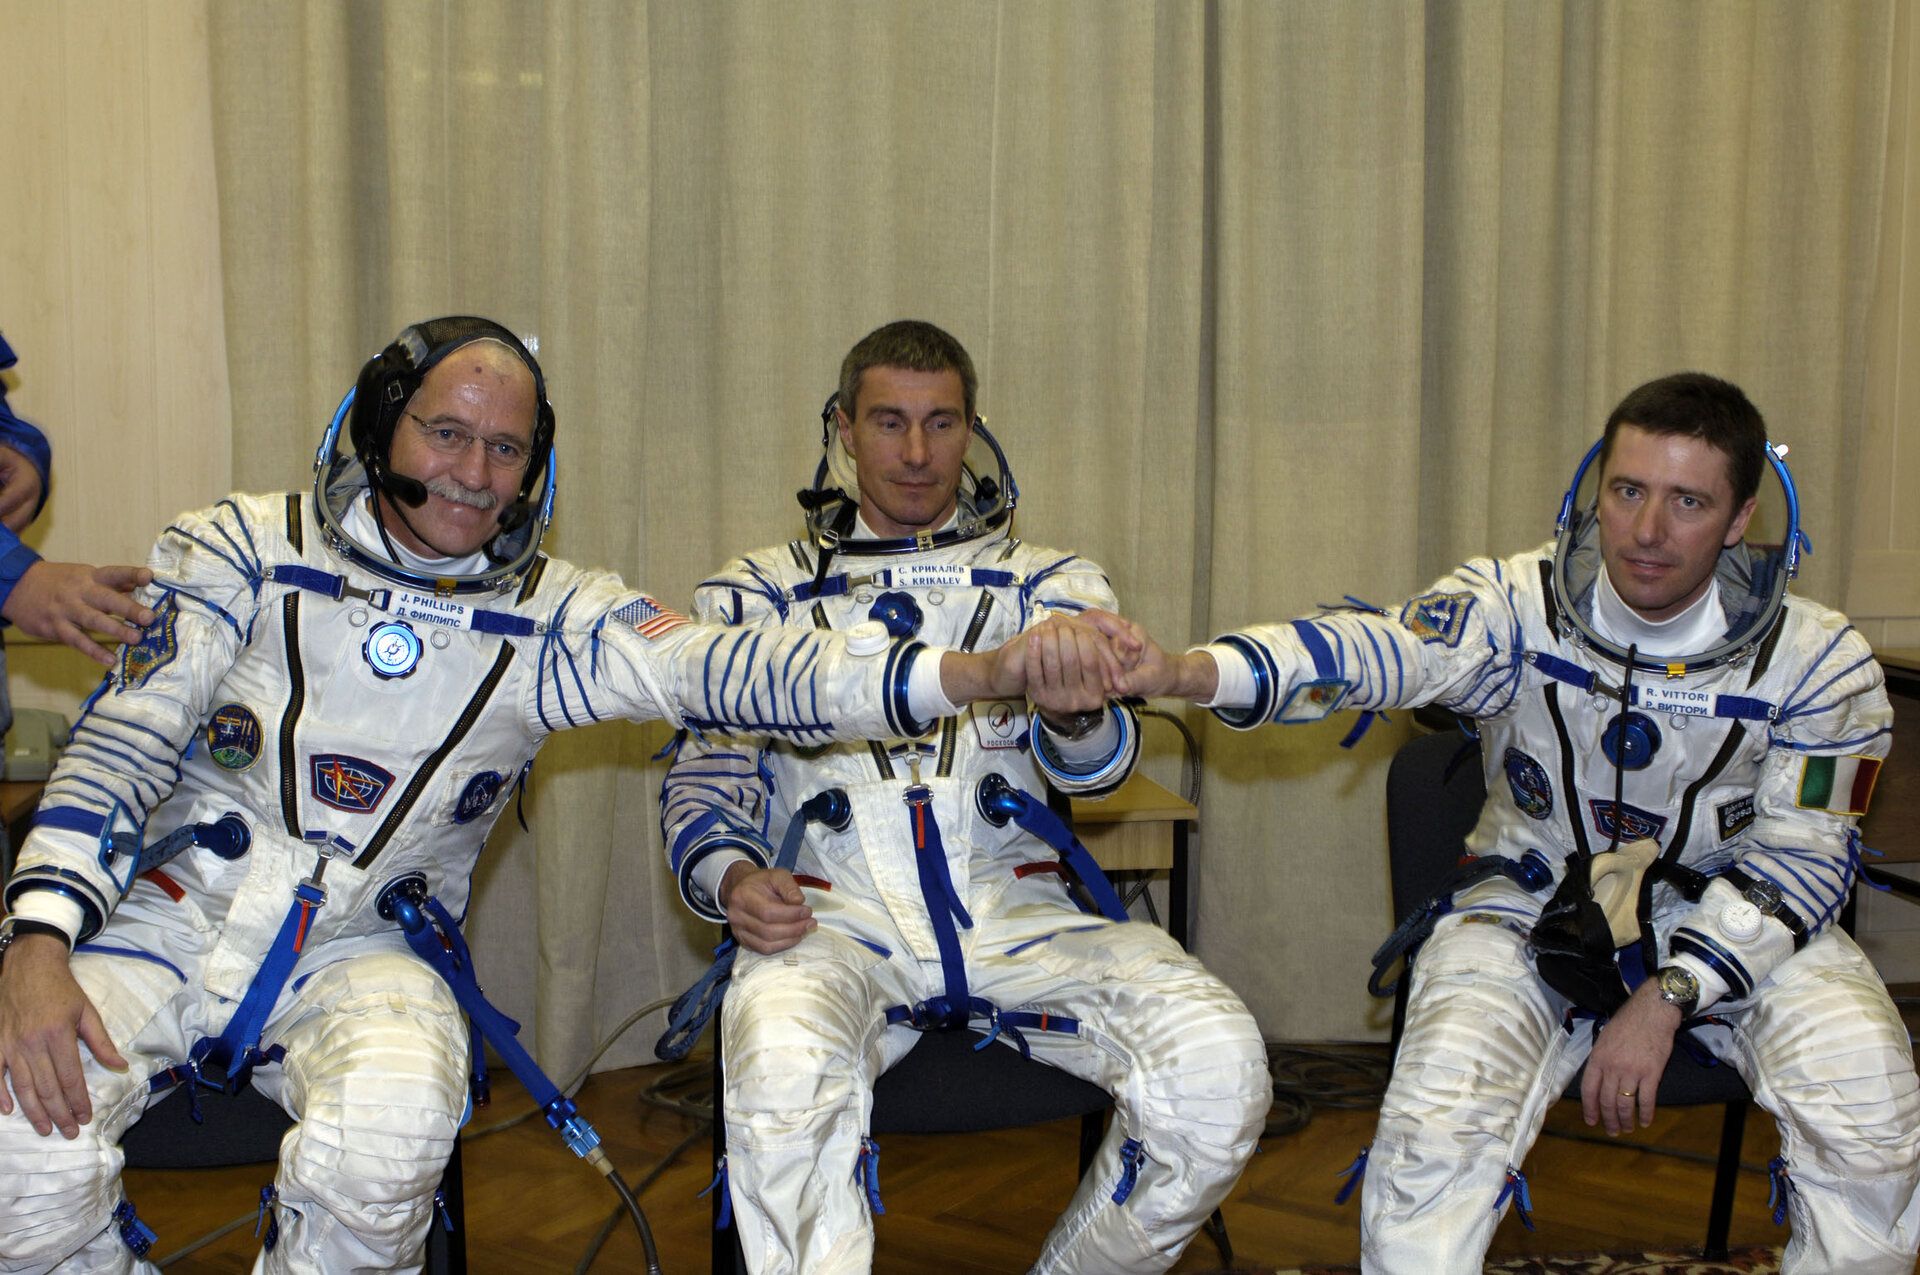 Soyuz TMA-6 crew during the final check of their Sokol pressure suits